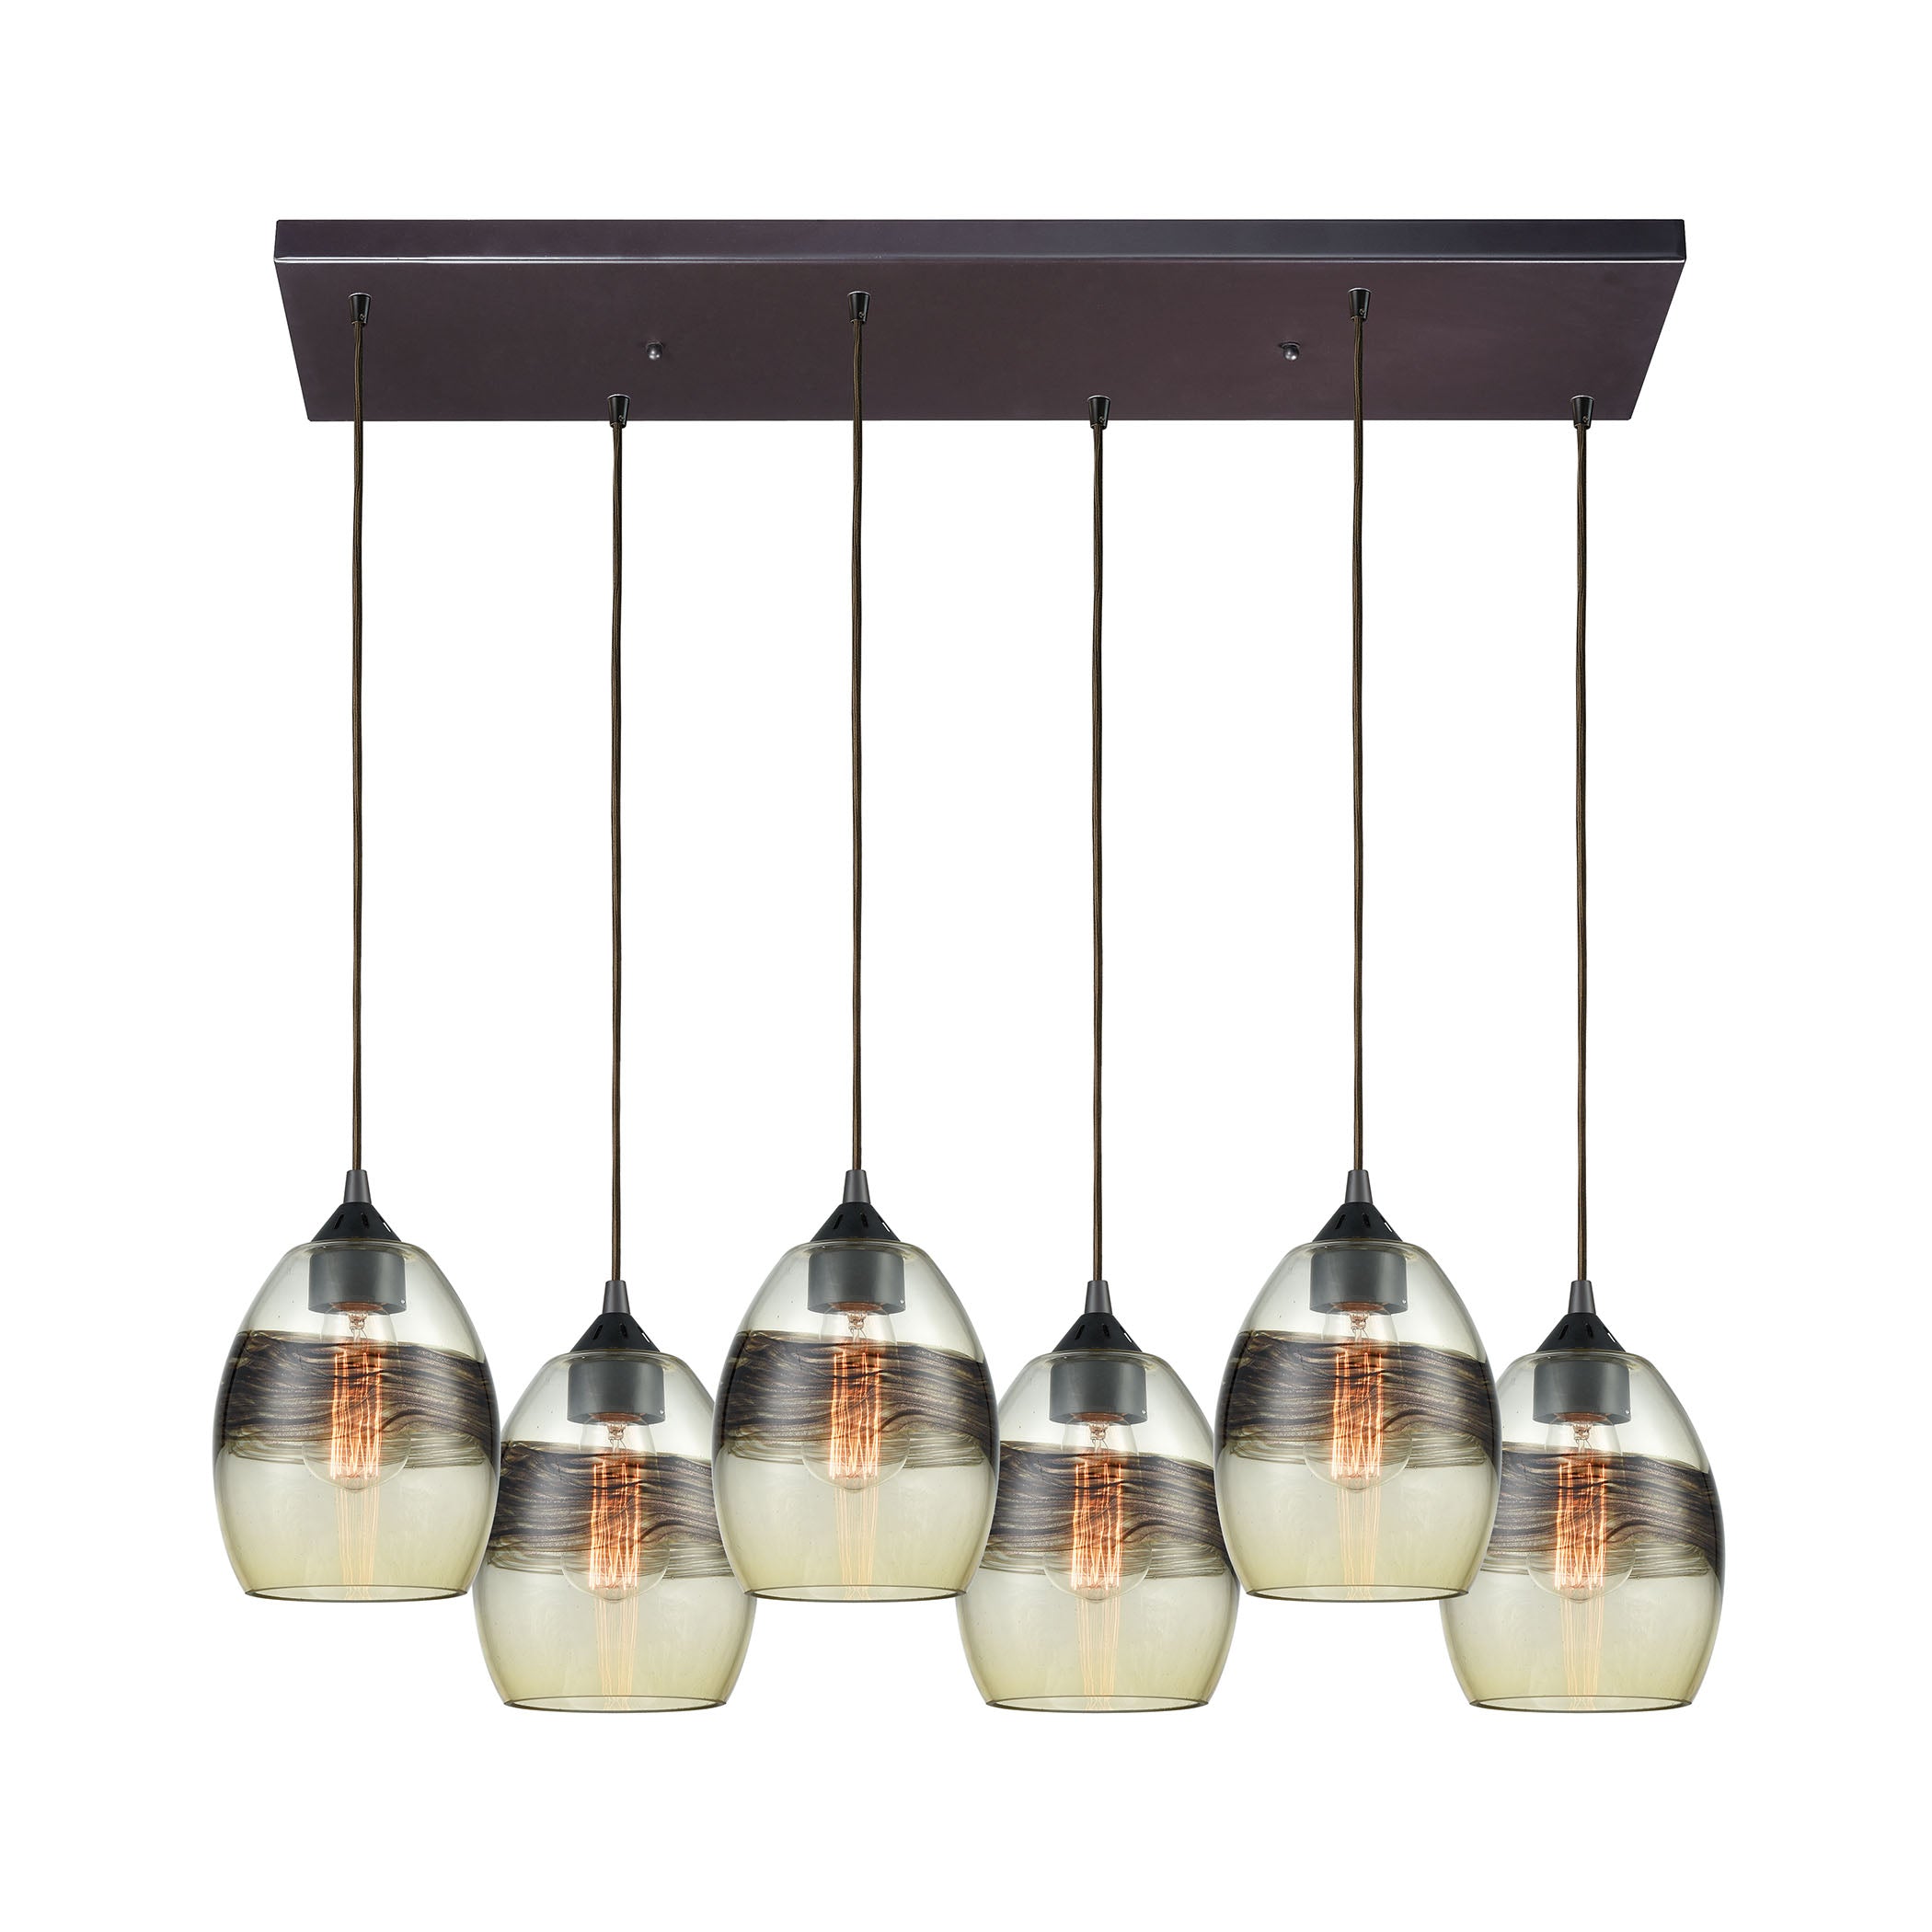 ELK Lighting 25122/6RC Whisp 6-Light Rectangular Pendant Fixture in Oil Rubbed Bronze with Champagne-plated Glass